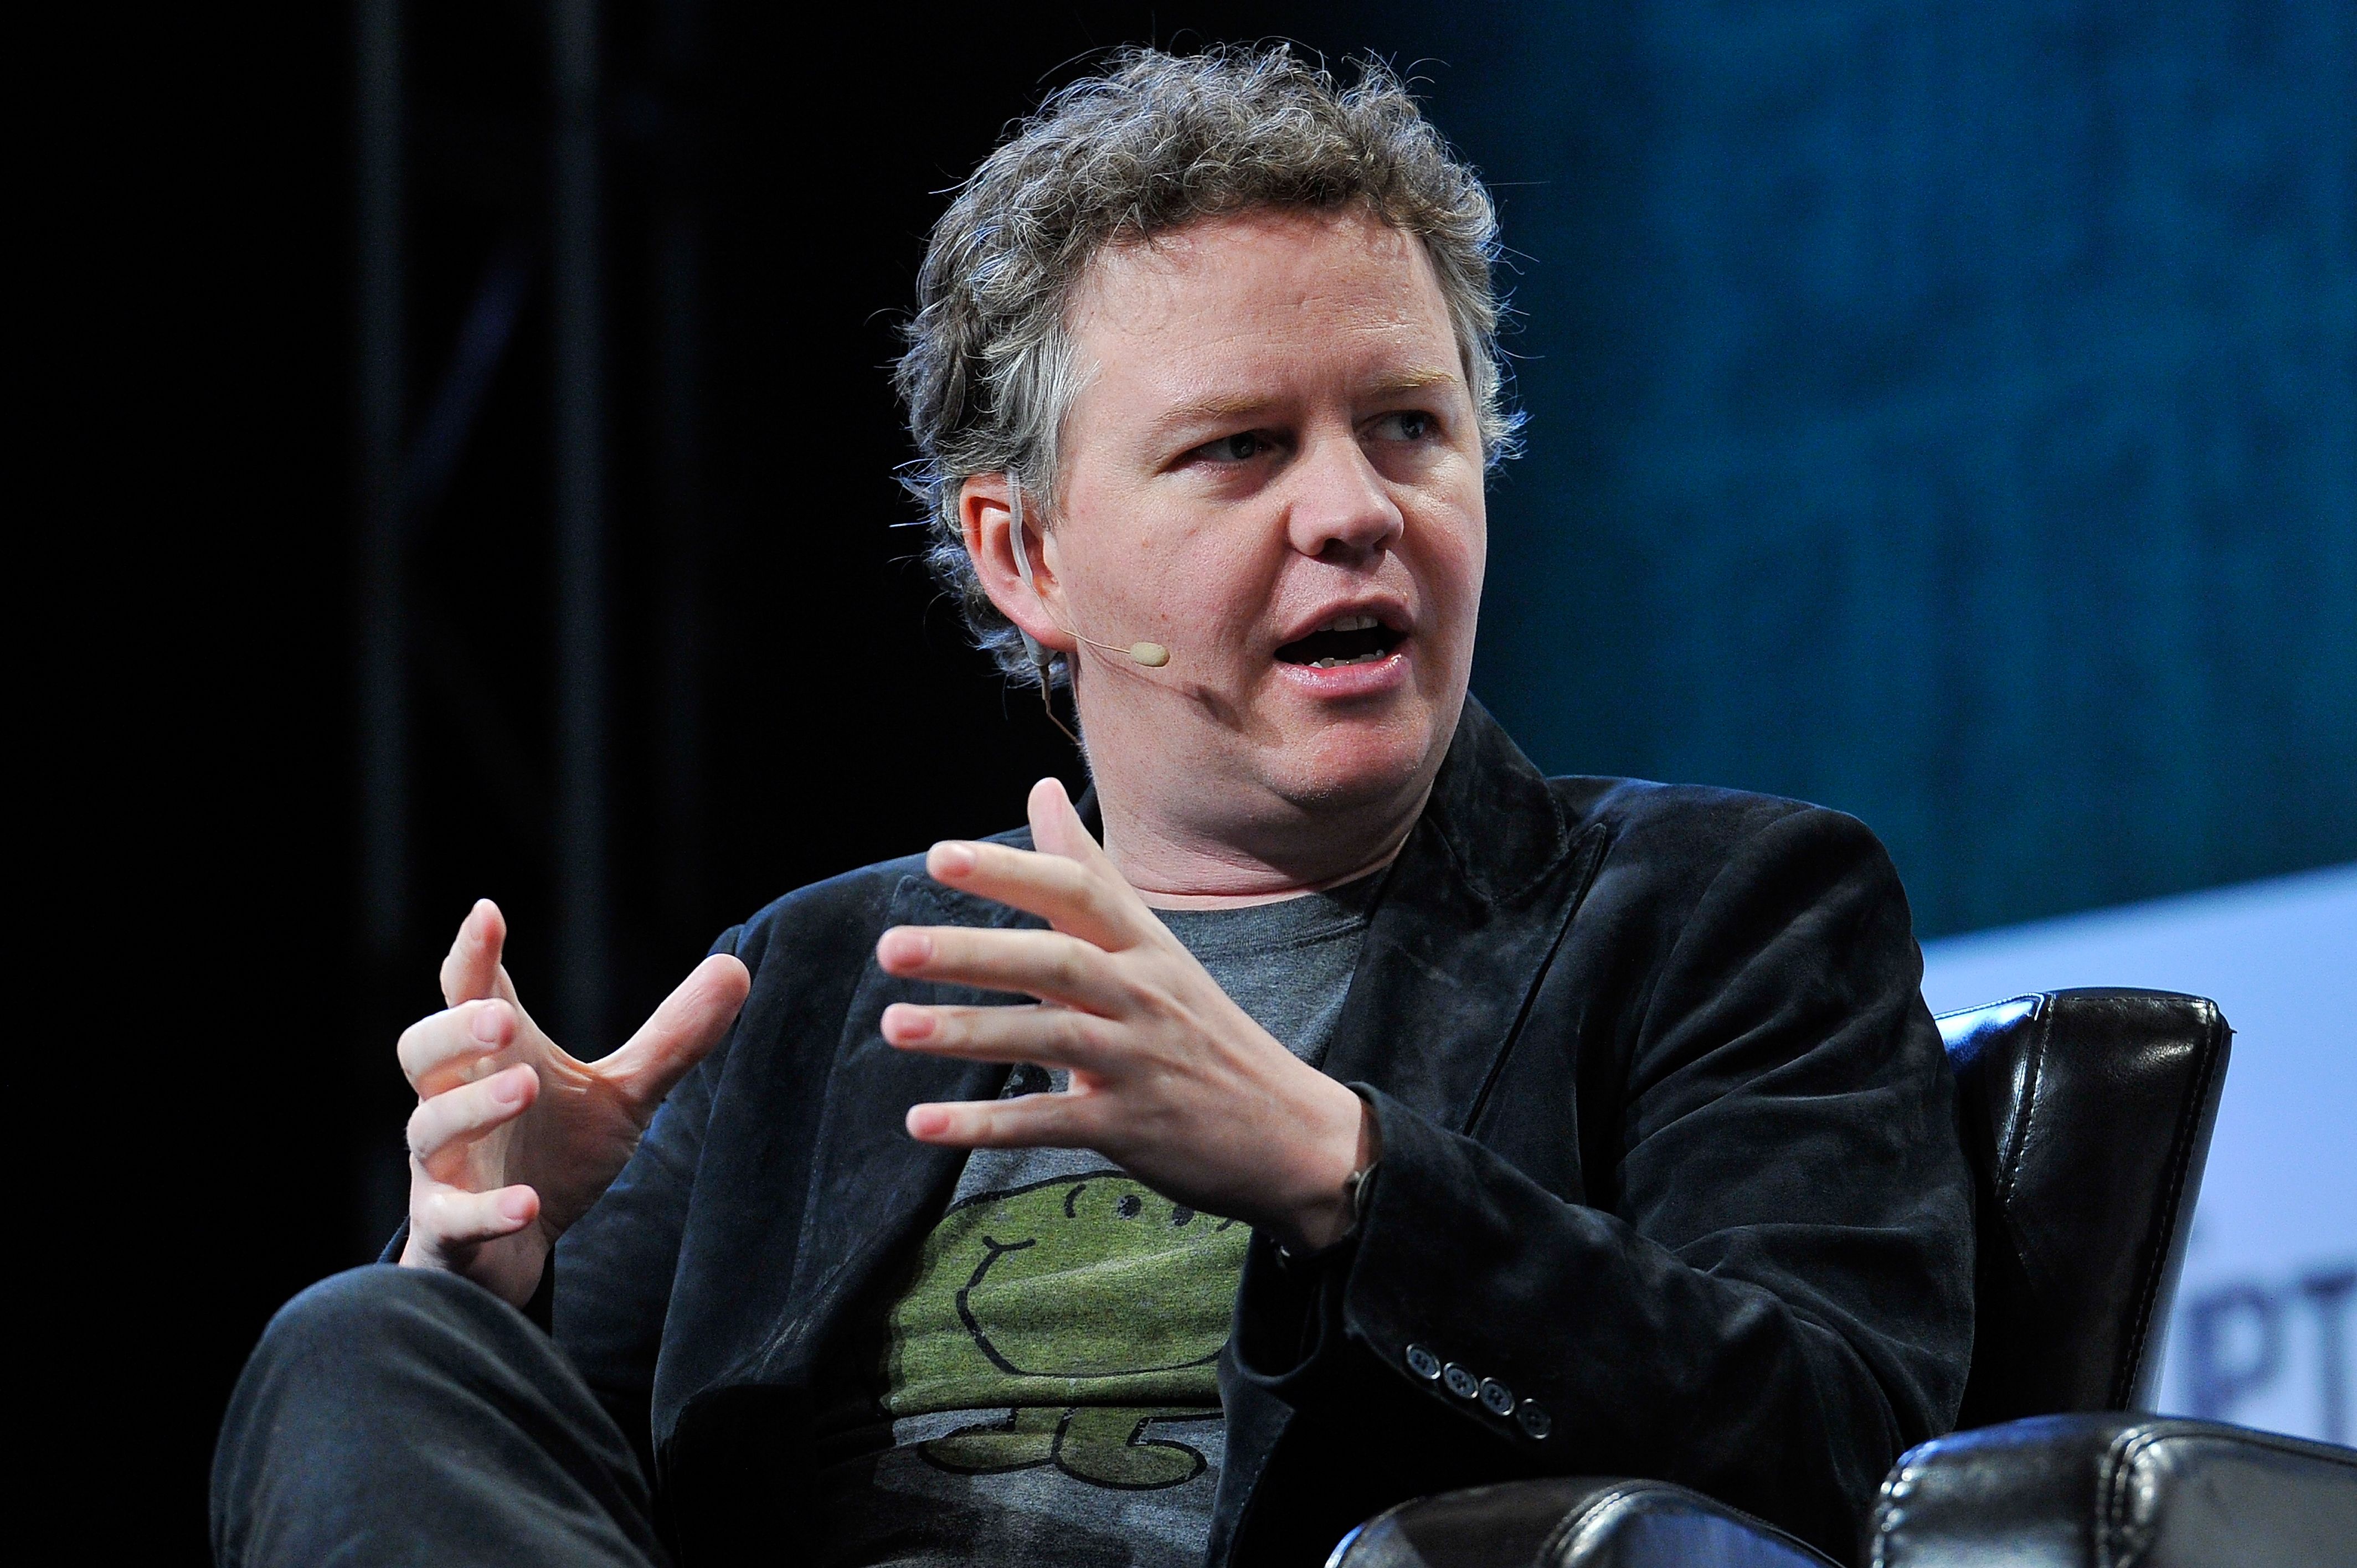 Cloudflare S-1 IPO filing